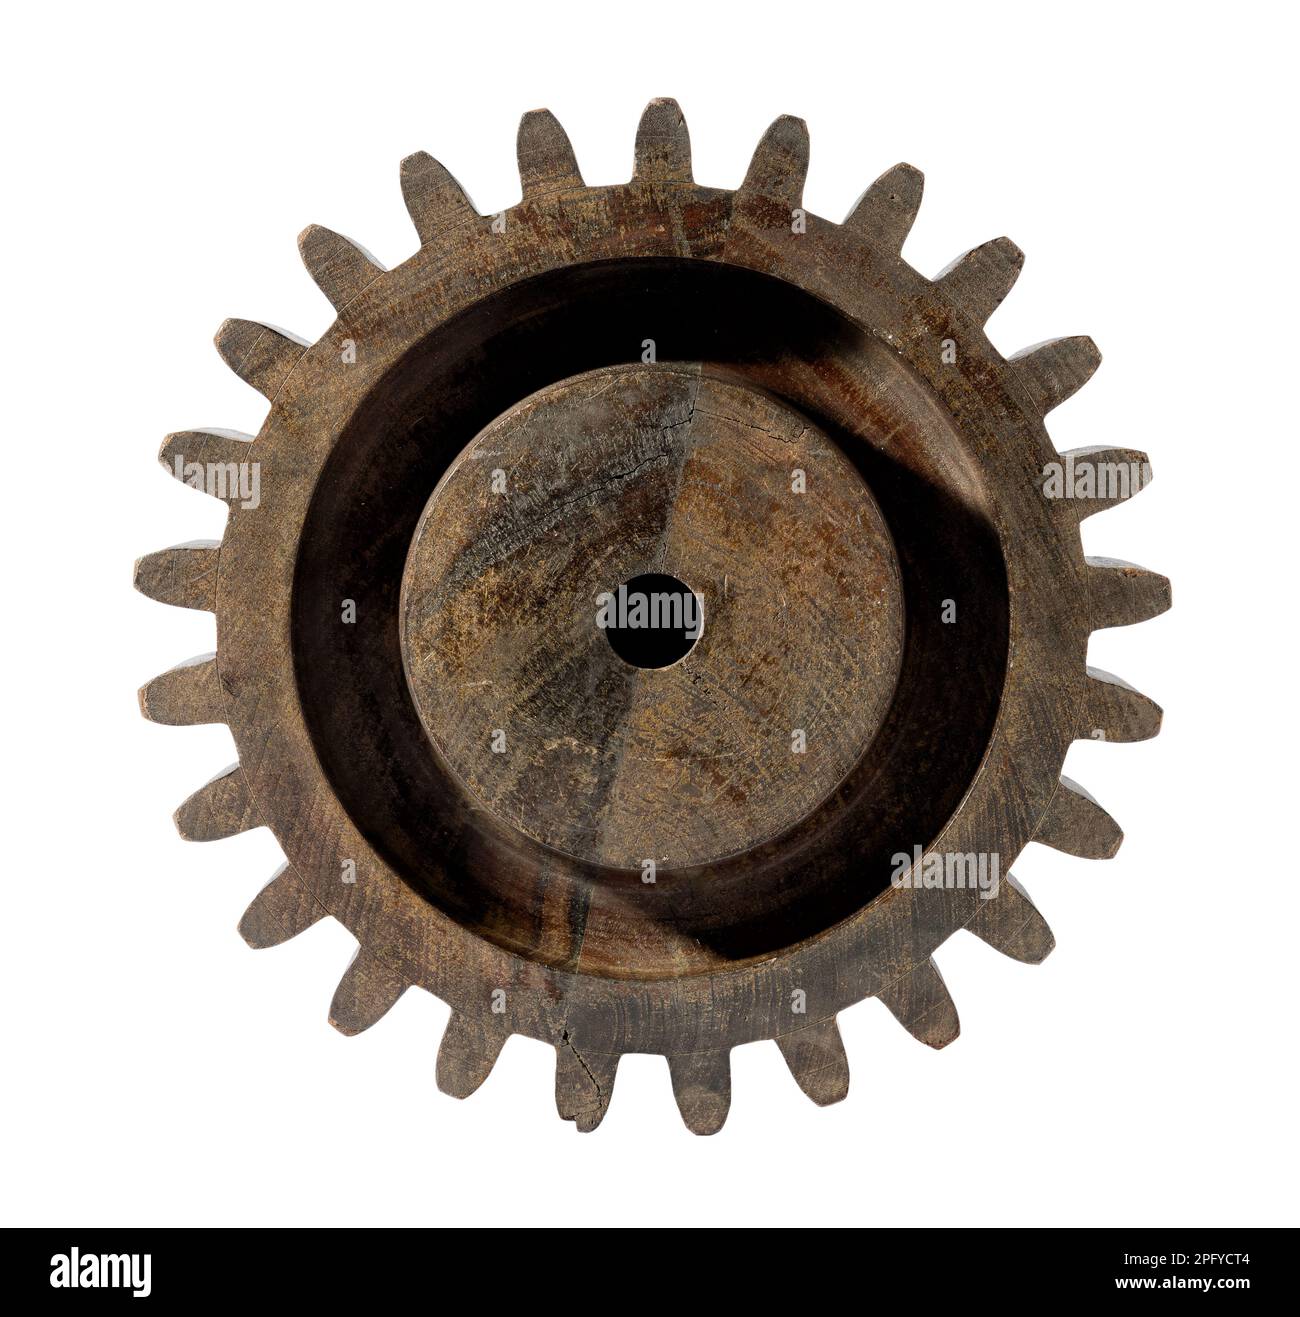 Brown symmetric vintage cog made of wood isolated on white background as part of old mechanism Stock Photo